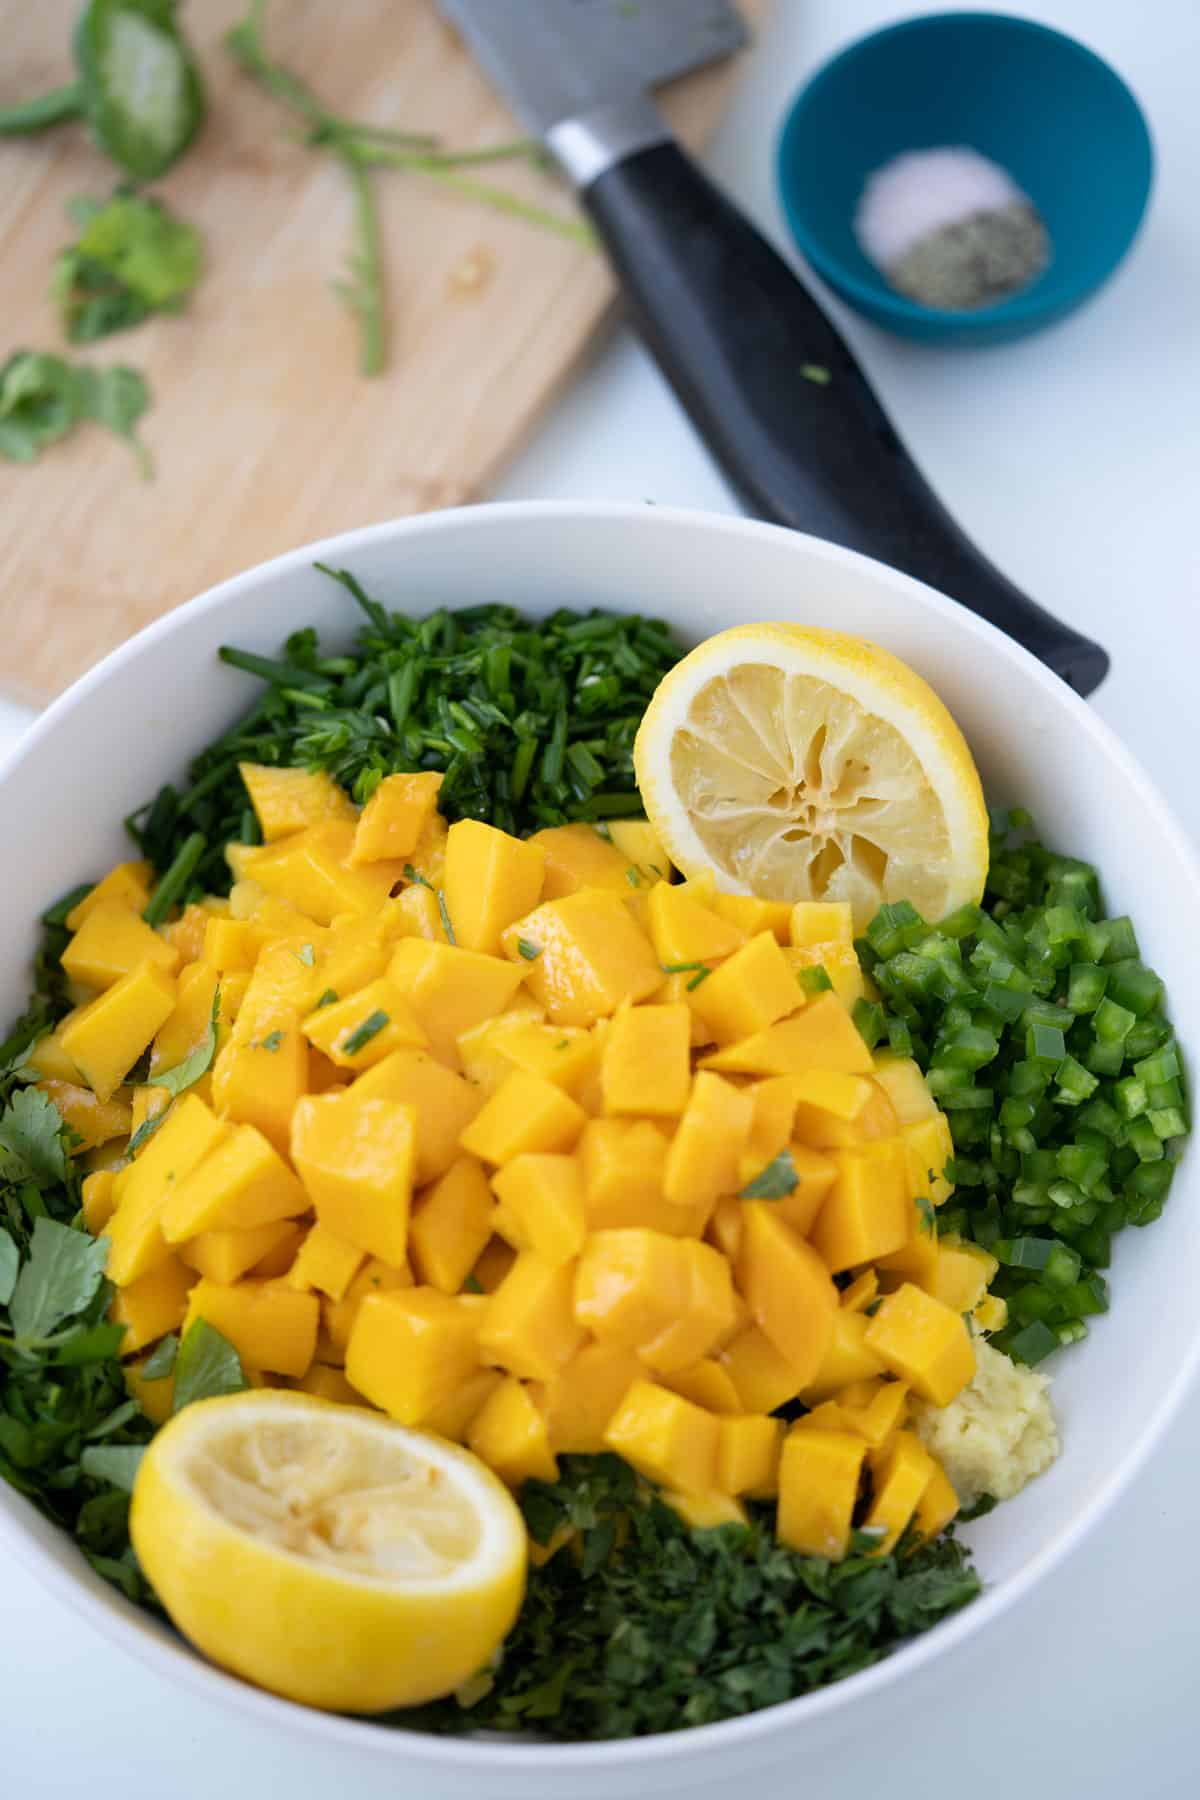 Mango mint salsa chopped up ingredients in a bowl with lemon halves